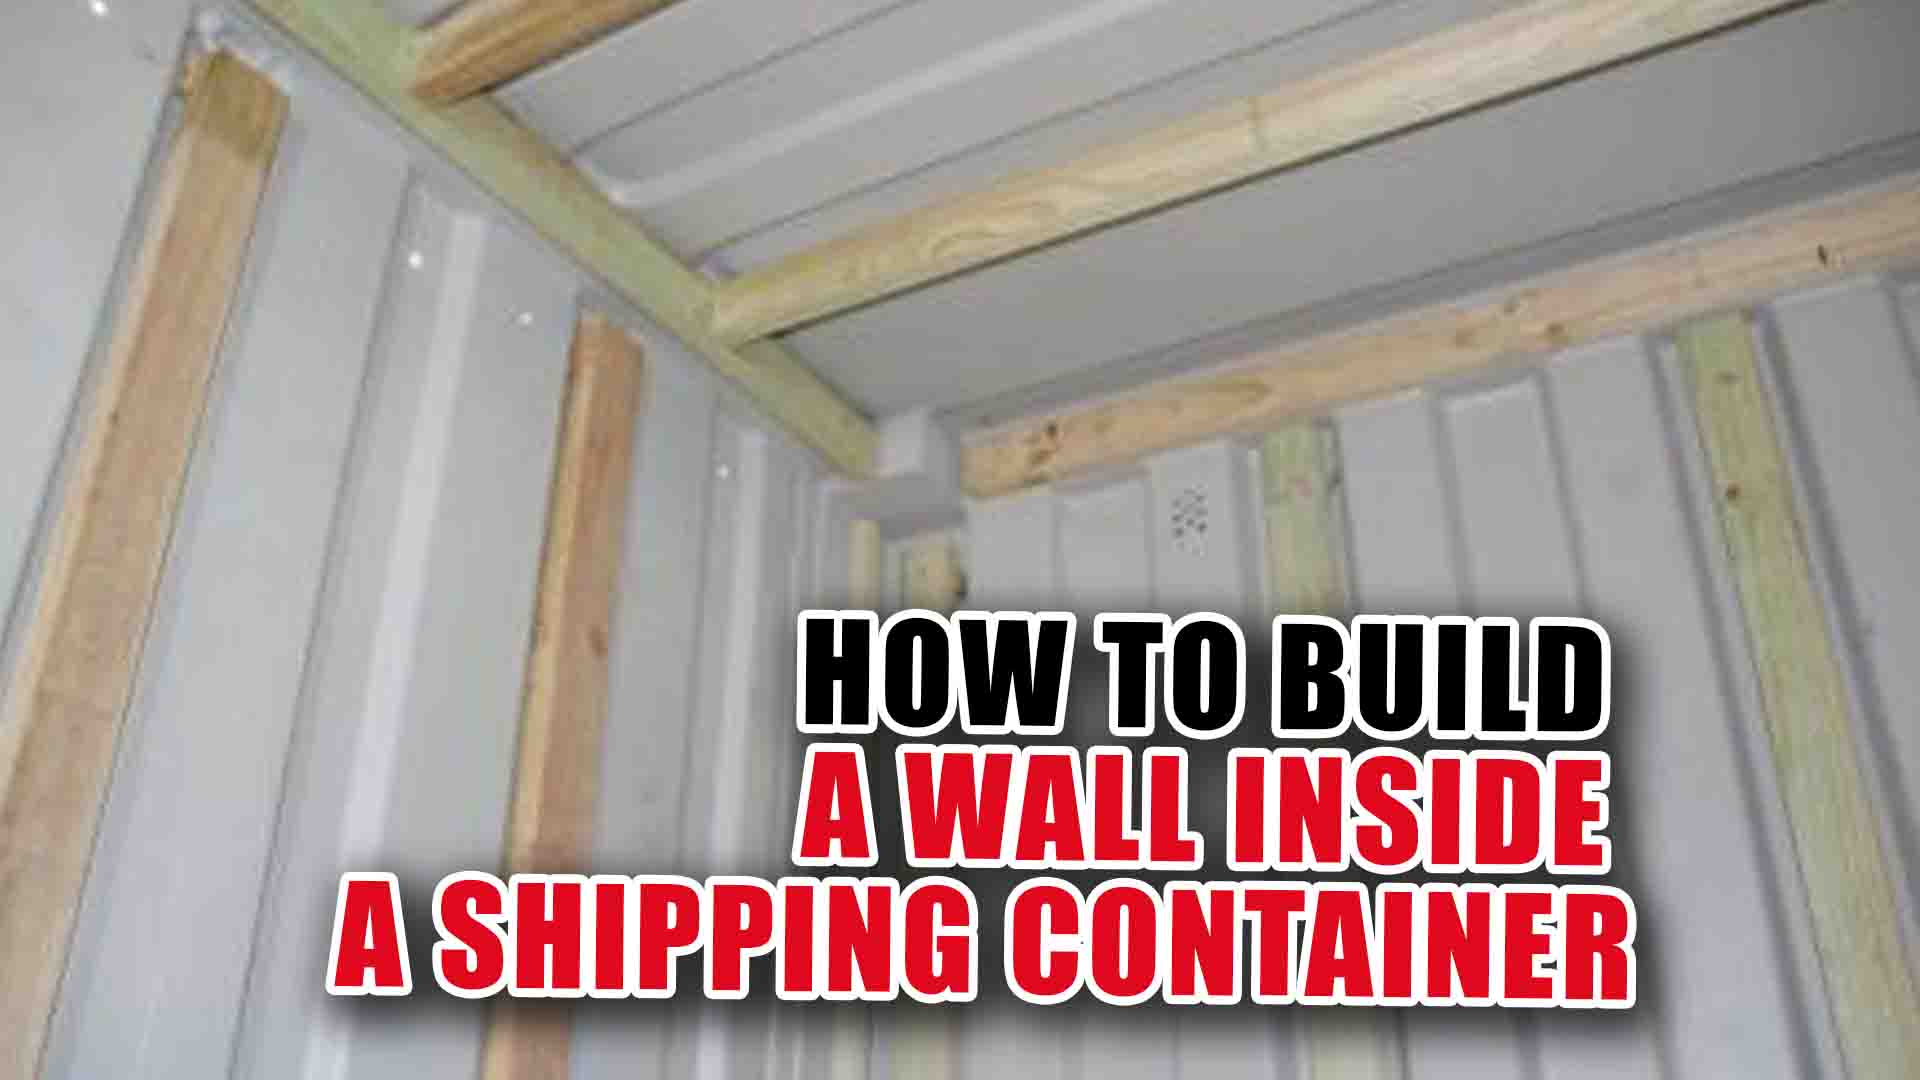 How to Build a Wall Inside a Shipping Container